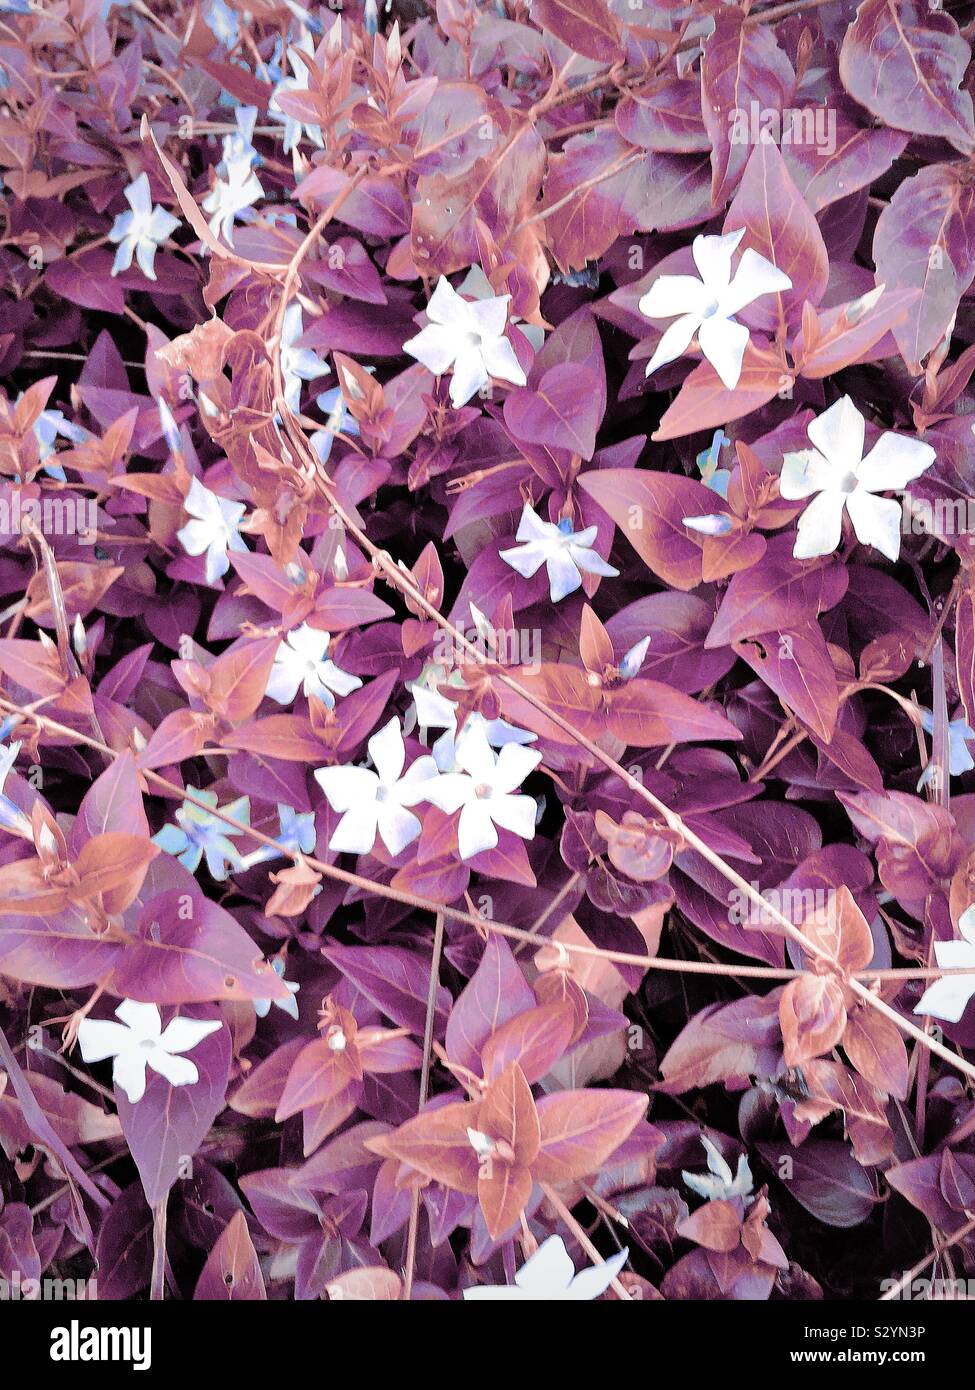 Flowering Vinca plant with colour alterations Stock Photo